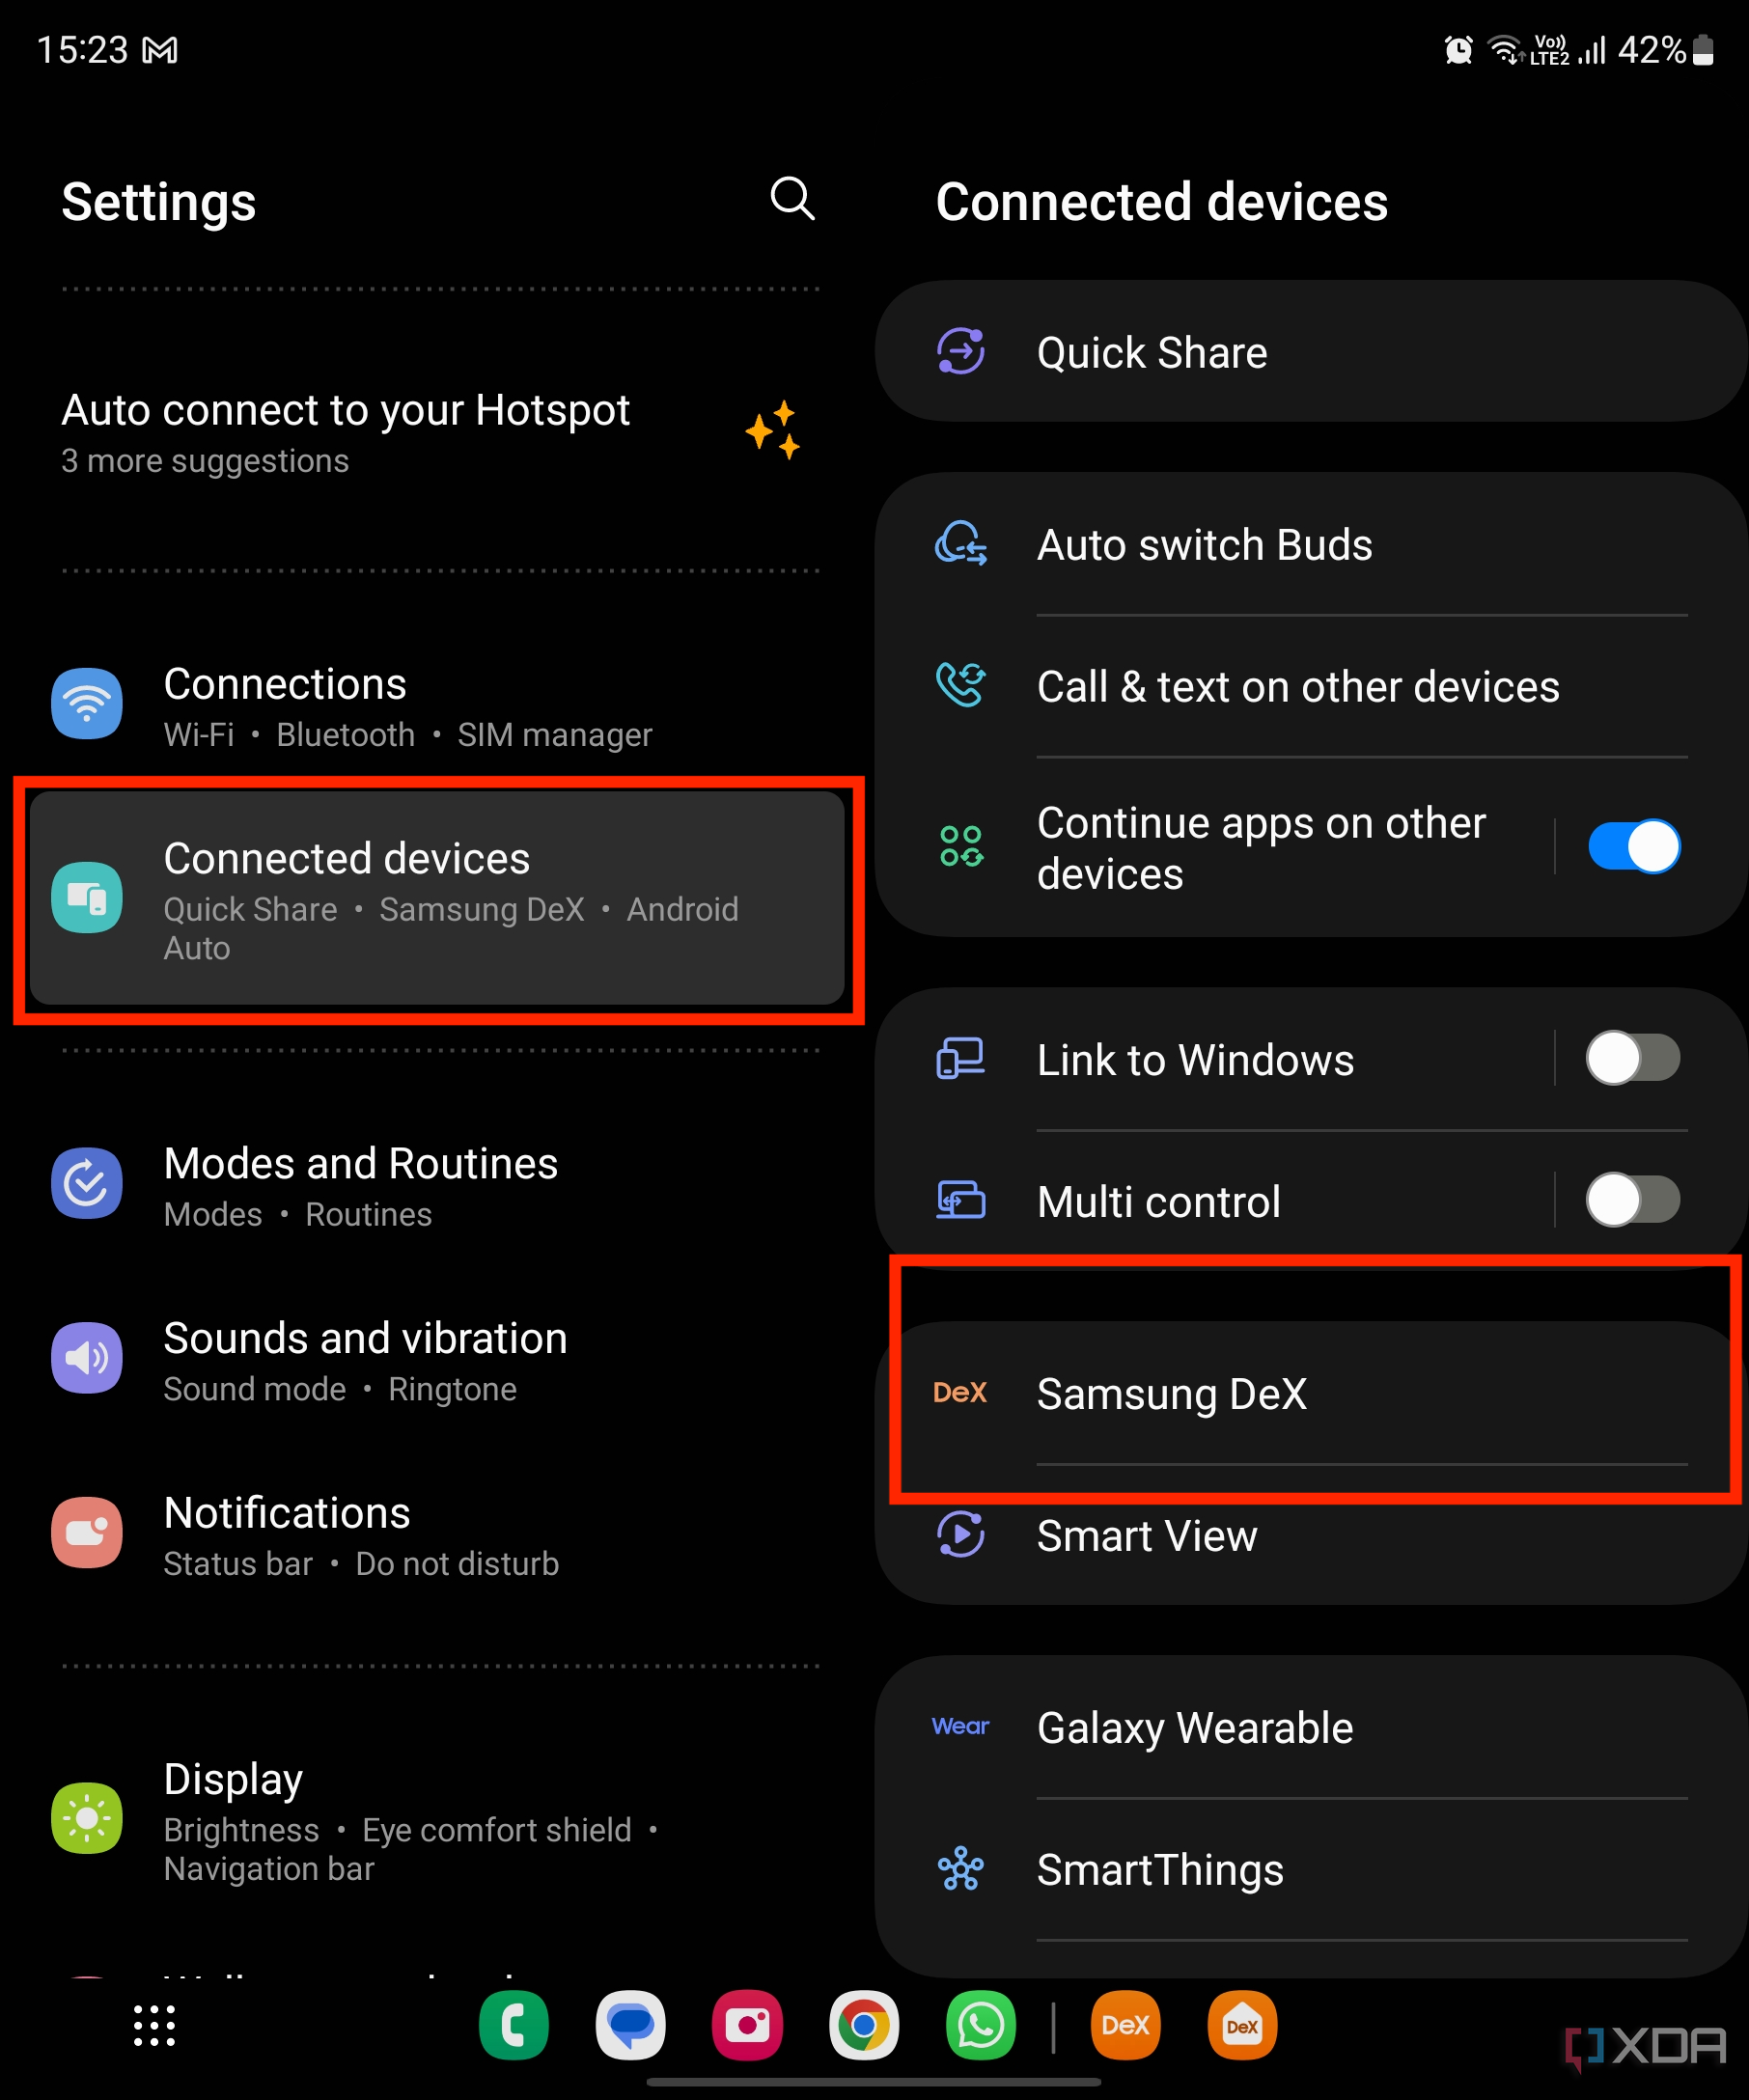 A screenshot showing the highlighted Connected devices and Samsung DeX options within the Settings page